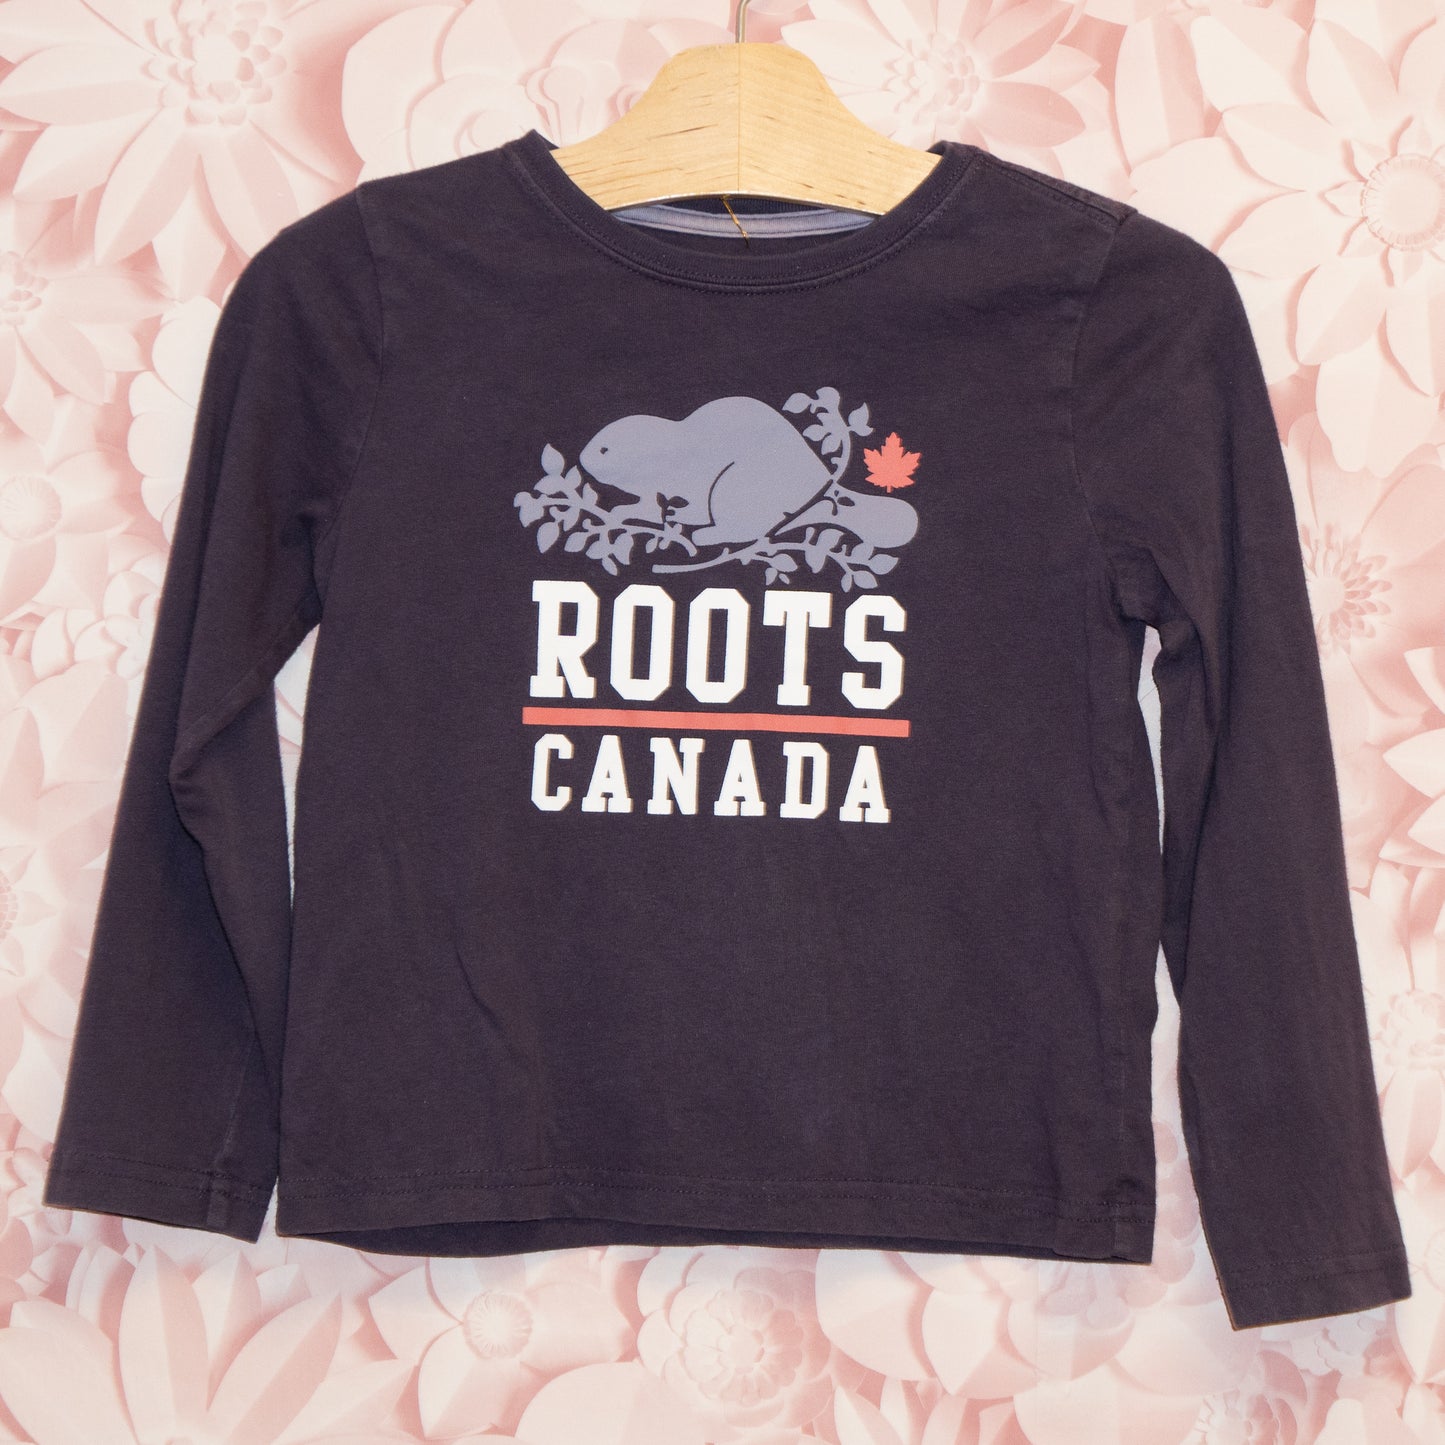 Roots Tee Size 5T